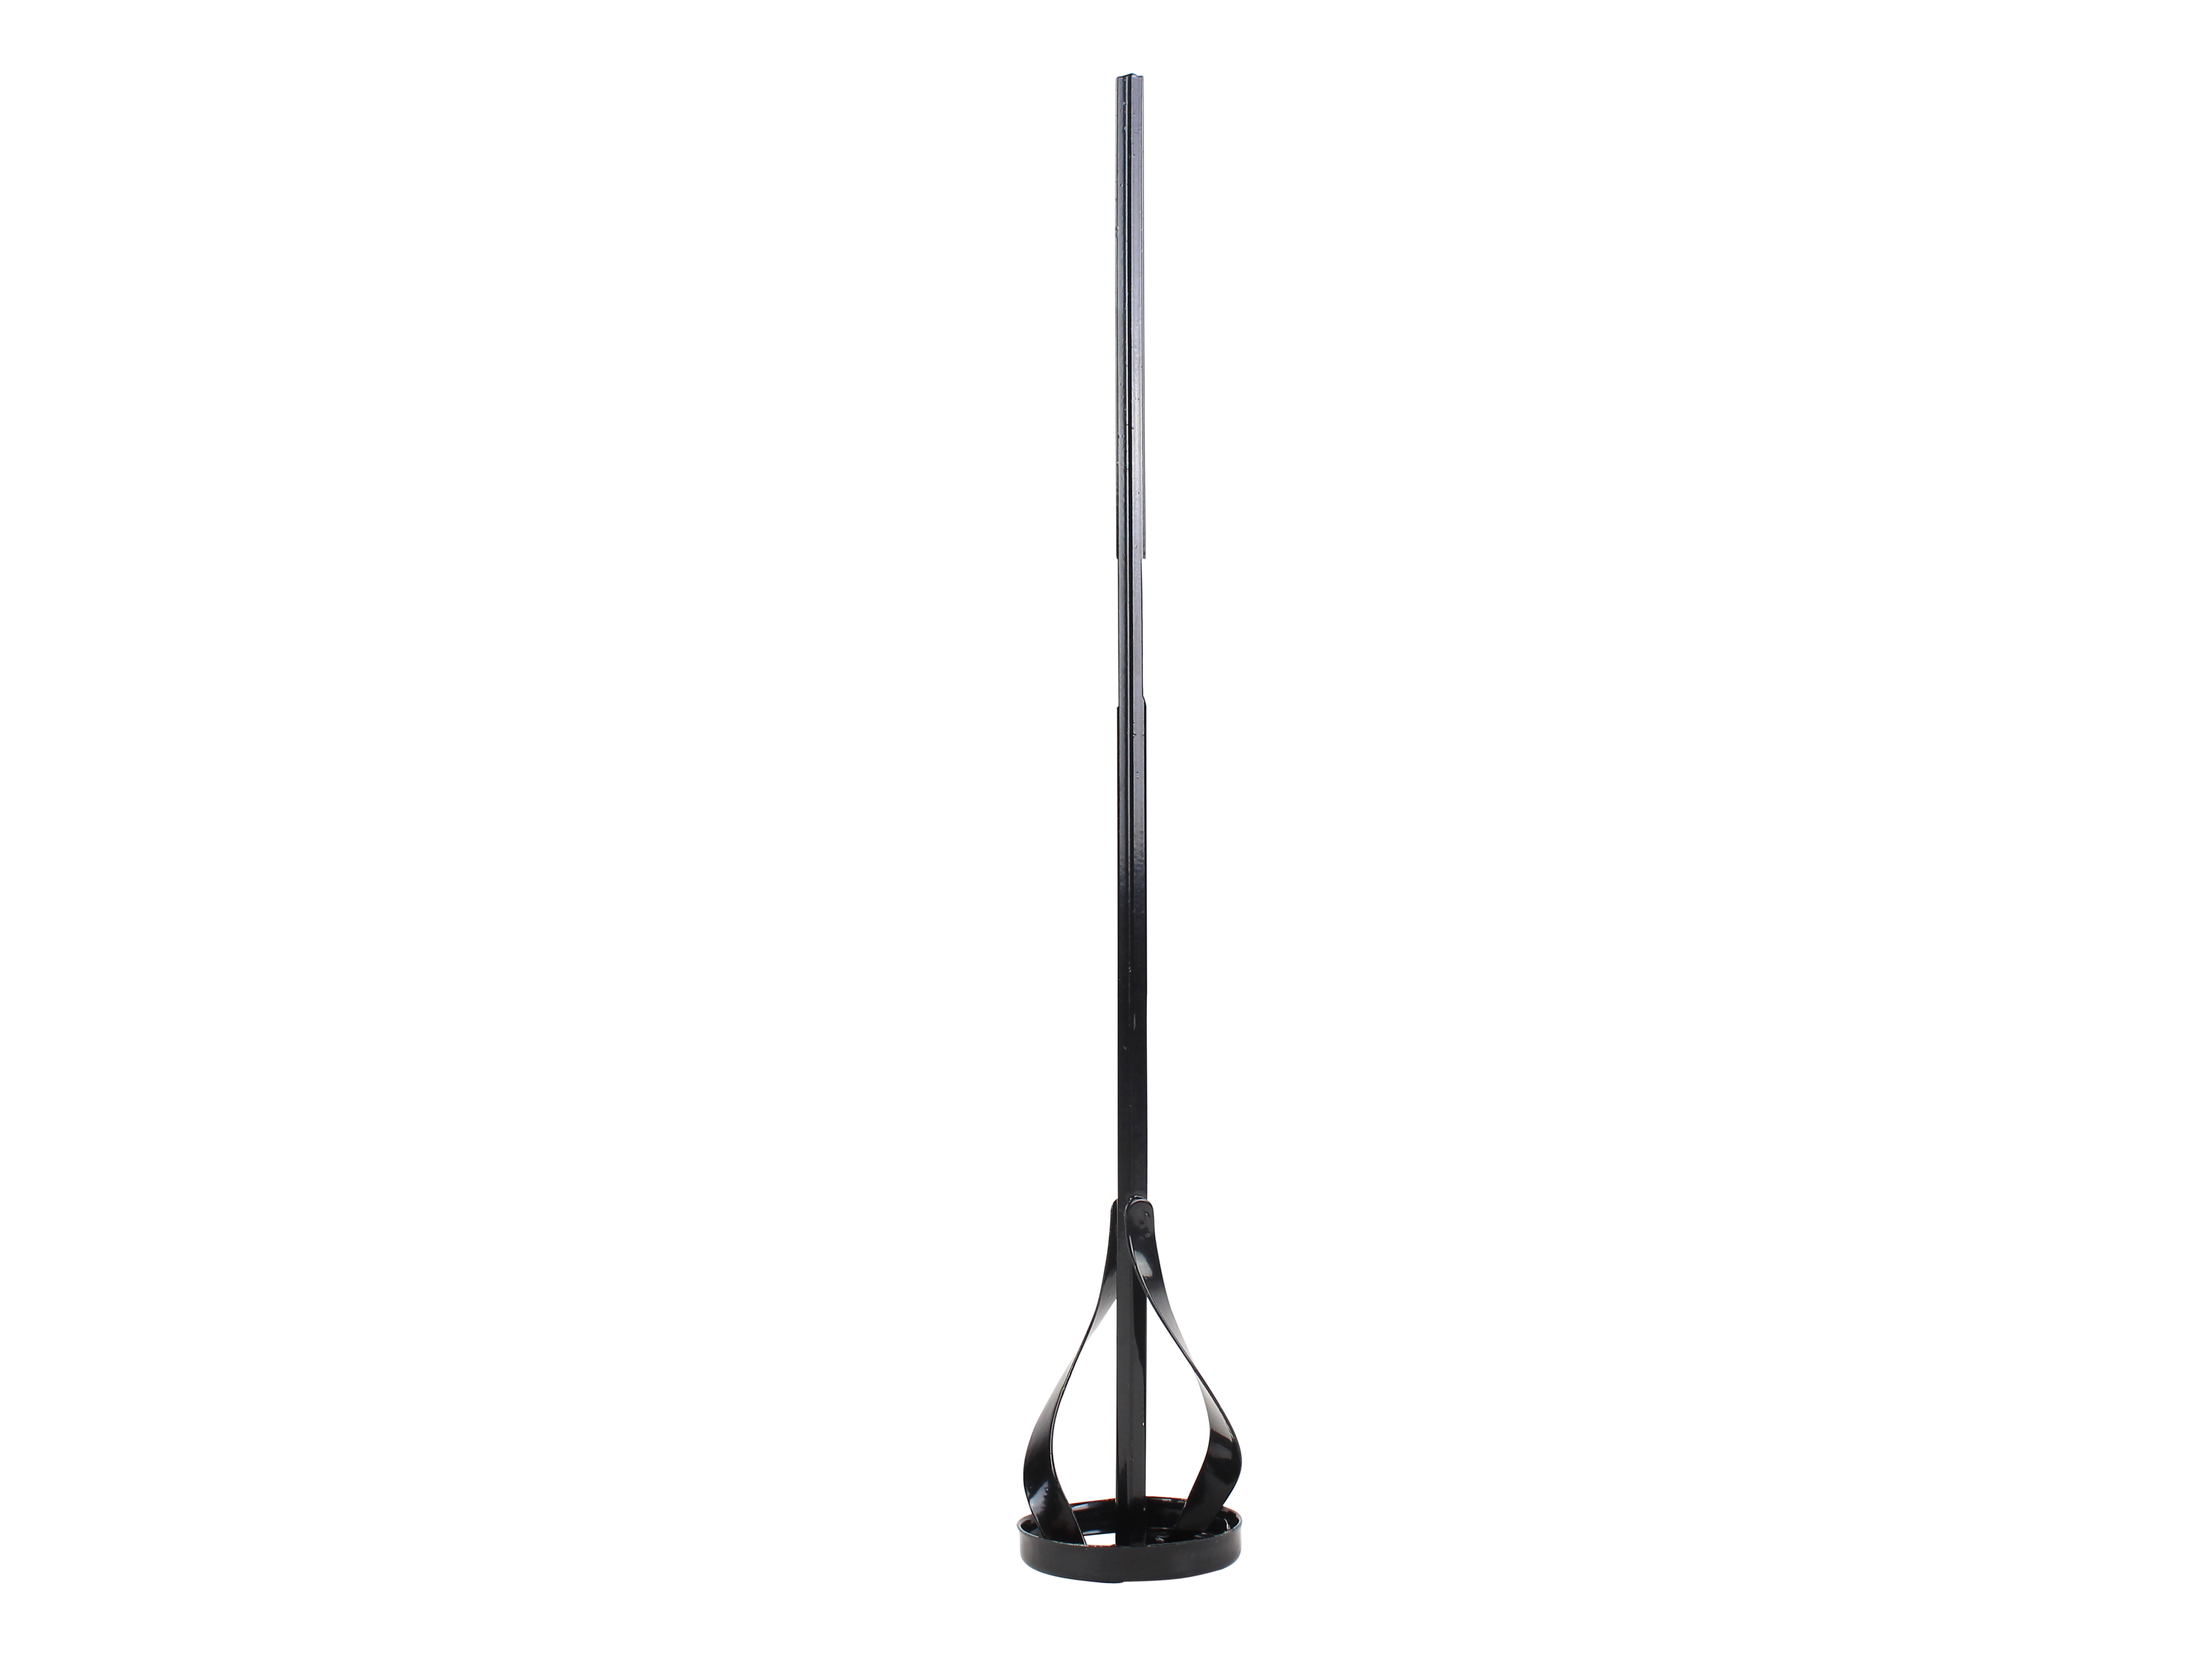 Mixer 60 mm - Stirrer available in various sizes